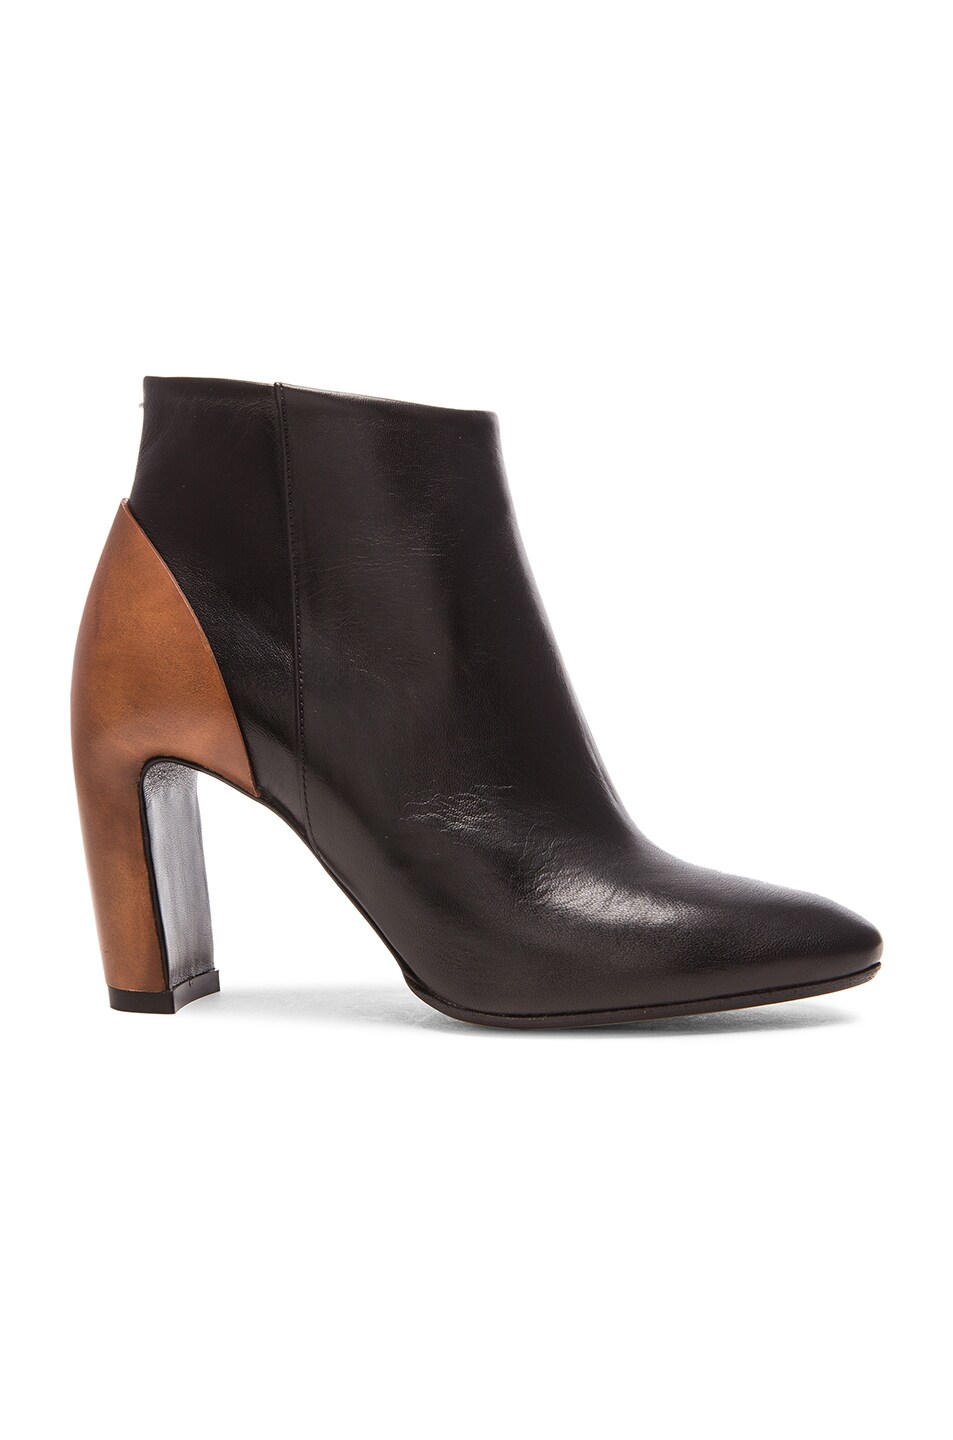 Image 1 of Maison Margiela Leather Ankle Booties in Black & Tabacco